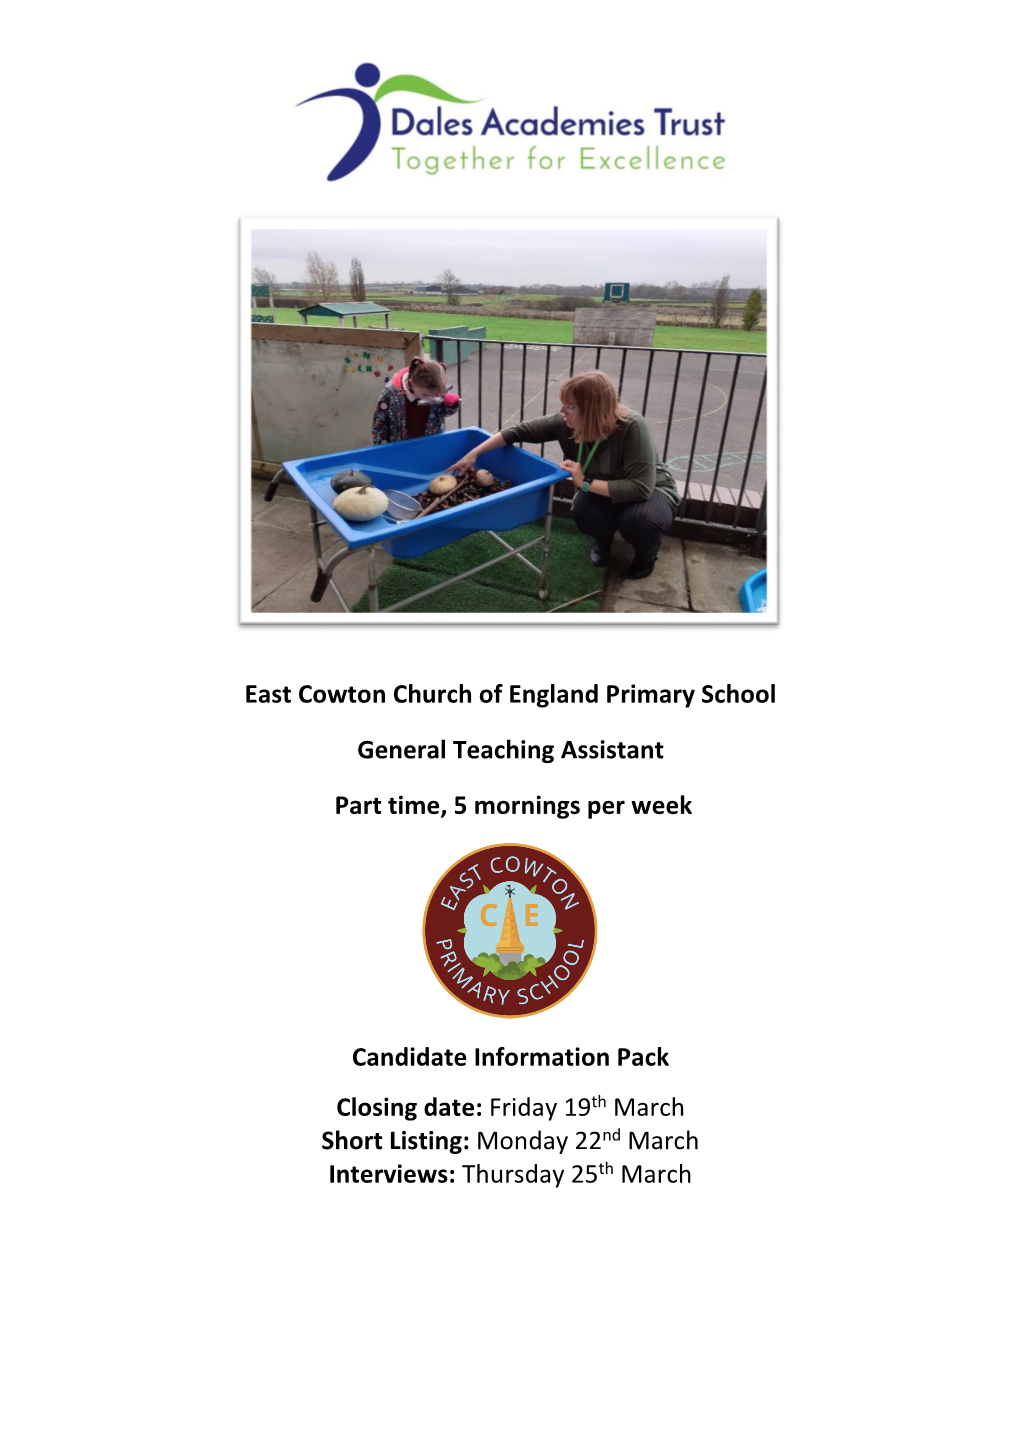 East Cowton Church of England Primary School General Teaching